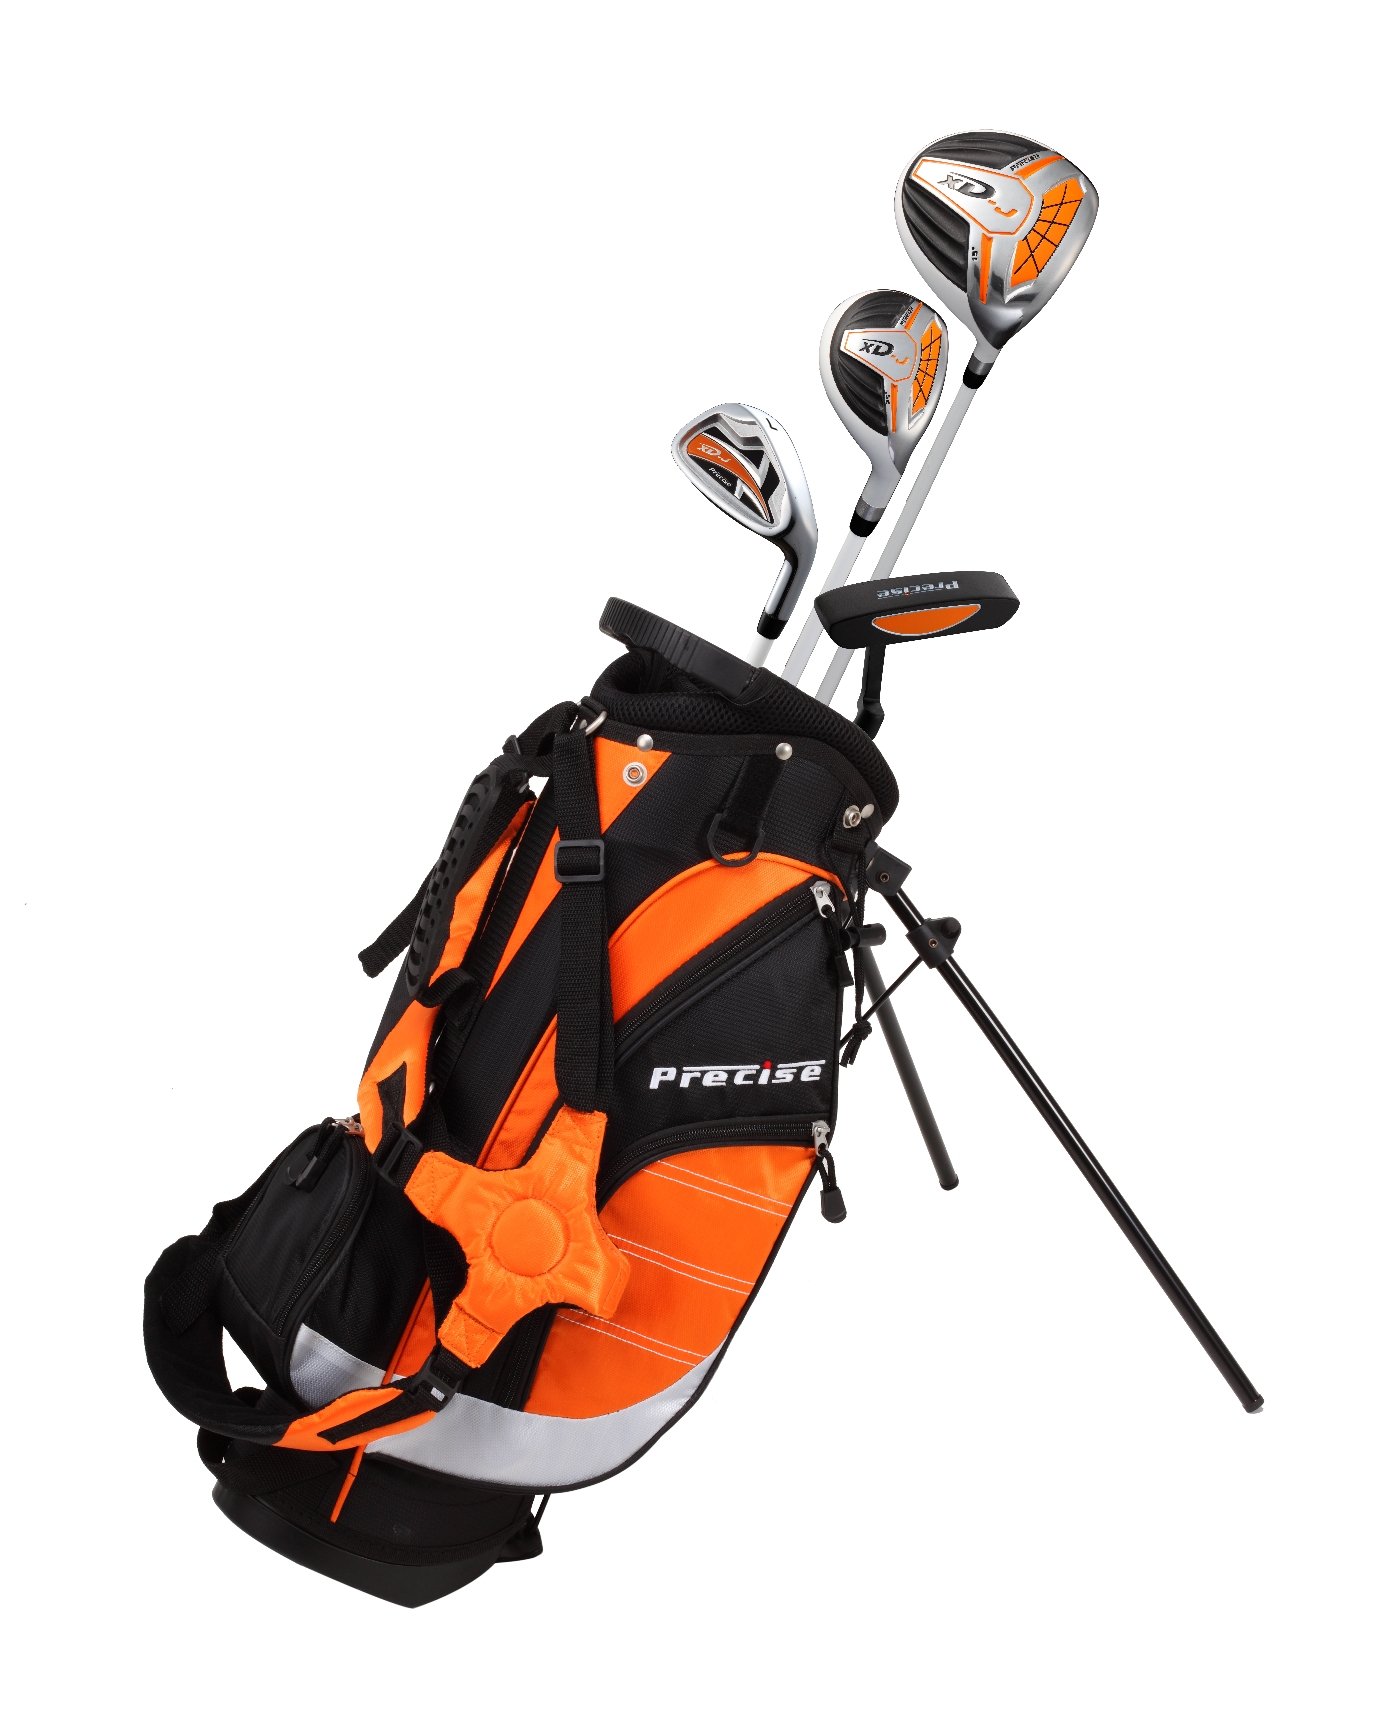 Remarkable Right Handed Junior Golf Club Set for Age 3 to 5 (Height 3' to 3'8